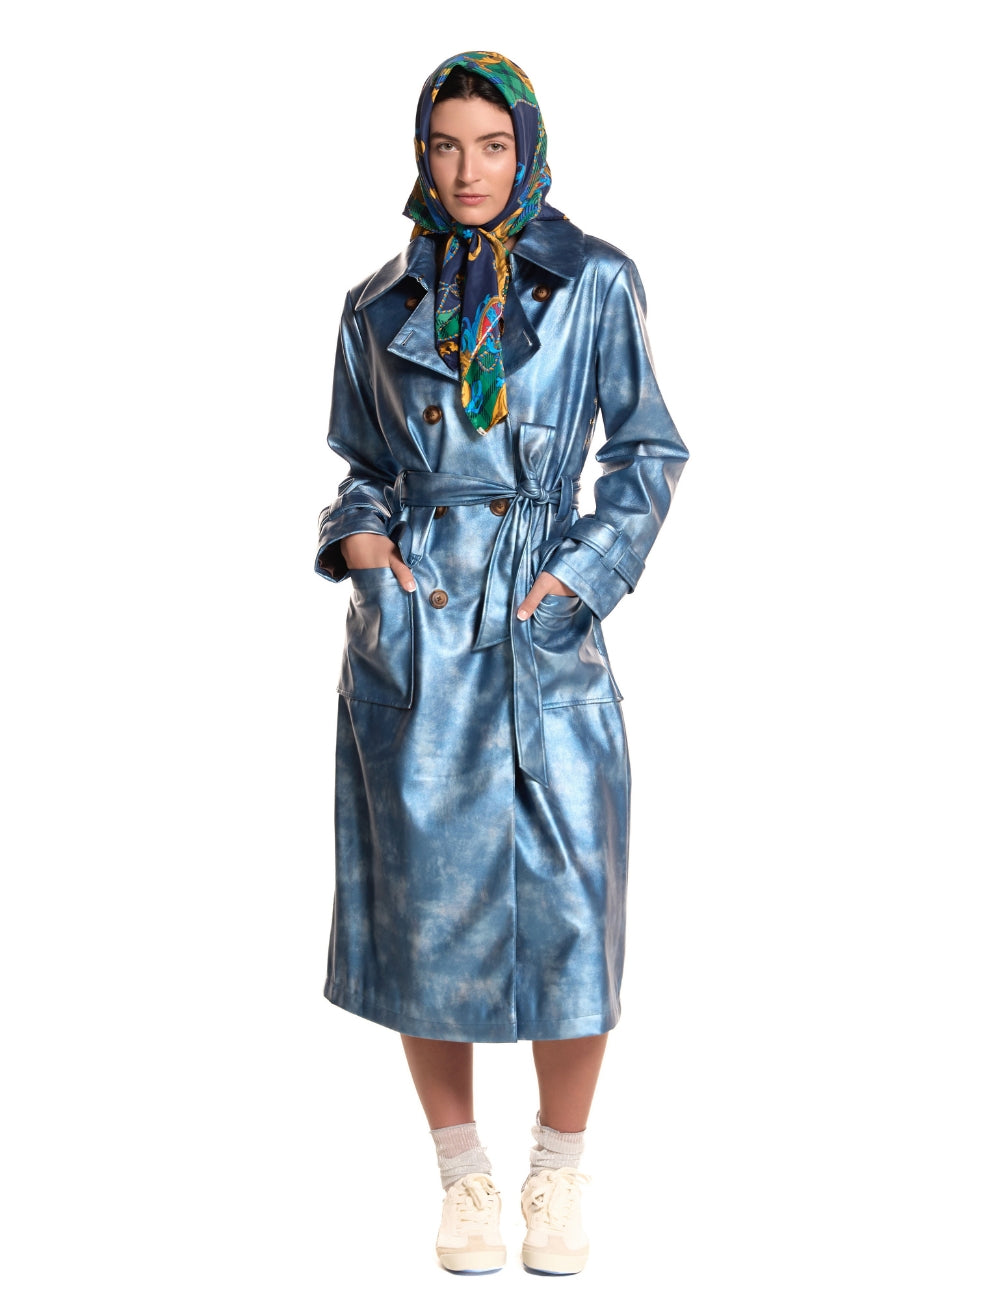 Trench coat gina bombay blue made in canada vegan leather zero waste